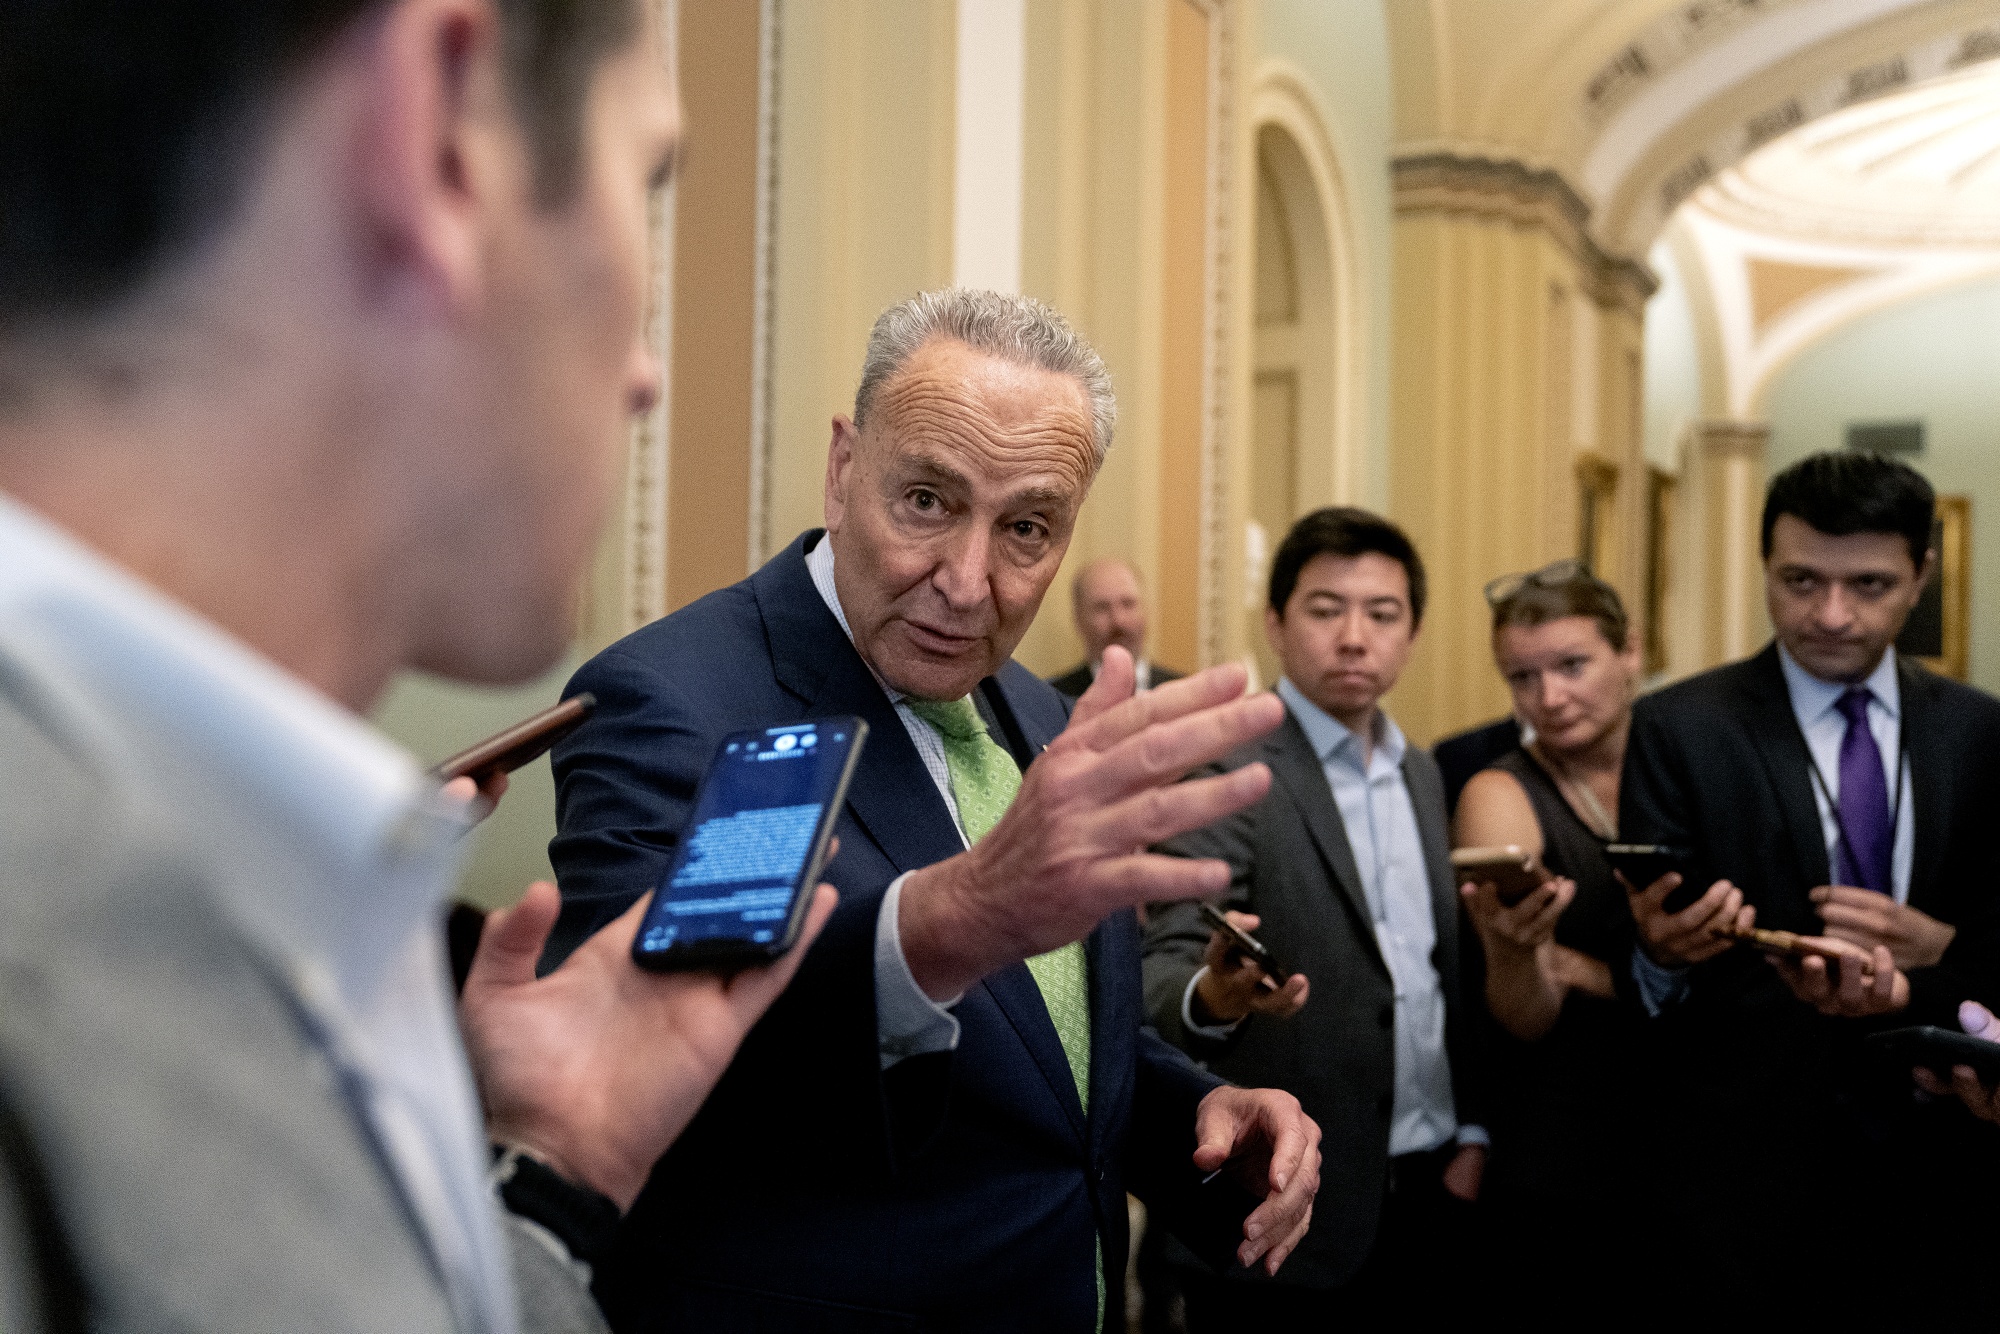 Senate Majority Leader Chuck Schumer, a Democrat from New York, center, speaks to members of the media at the U.S. Capitol in Washington, D.C.